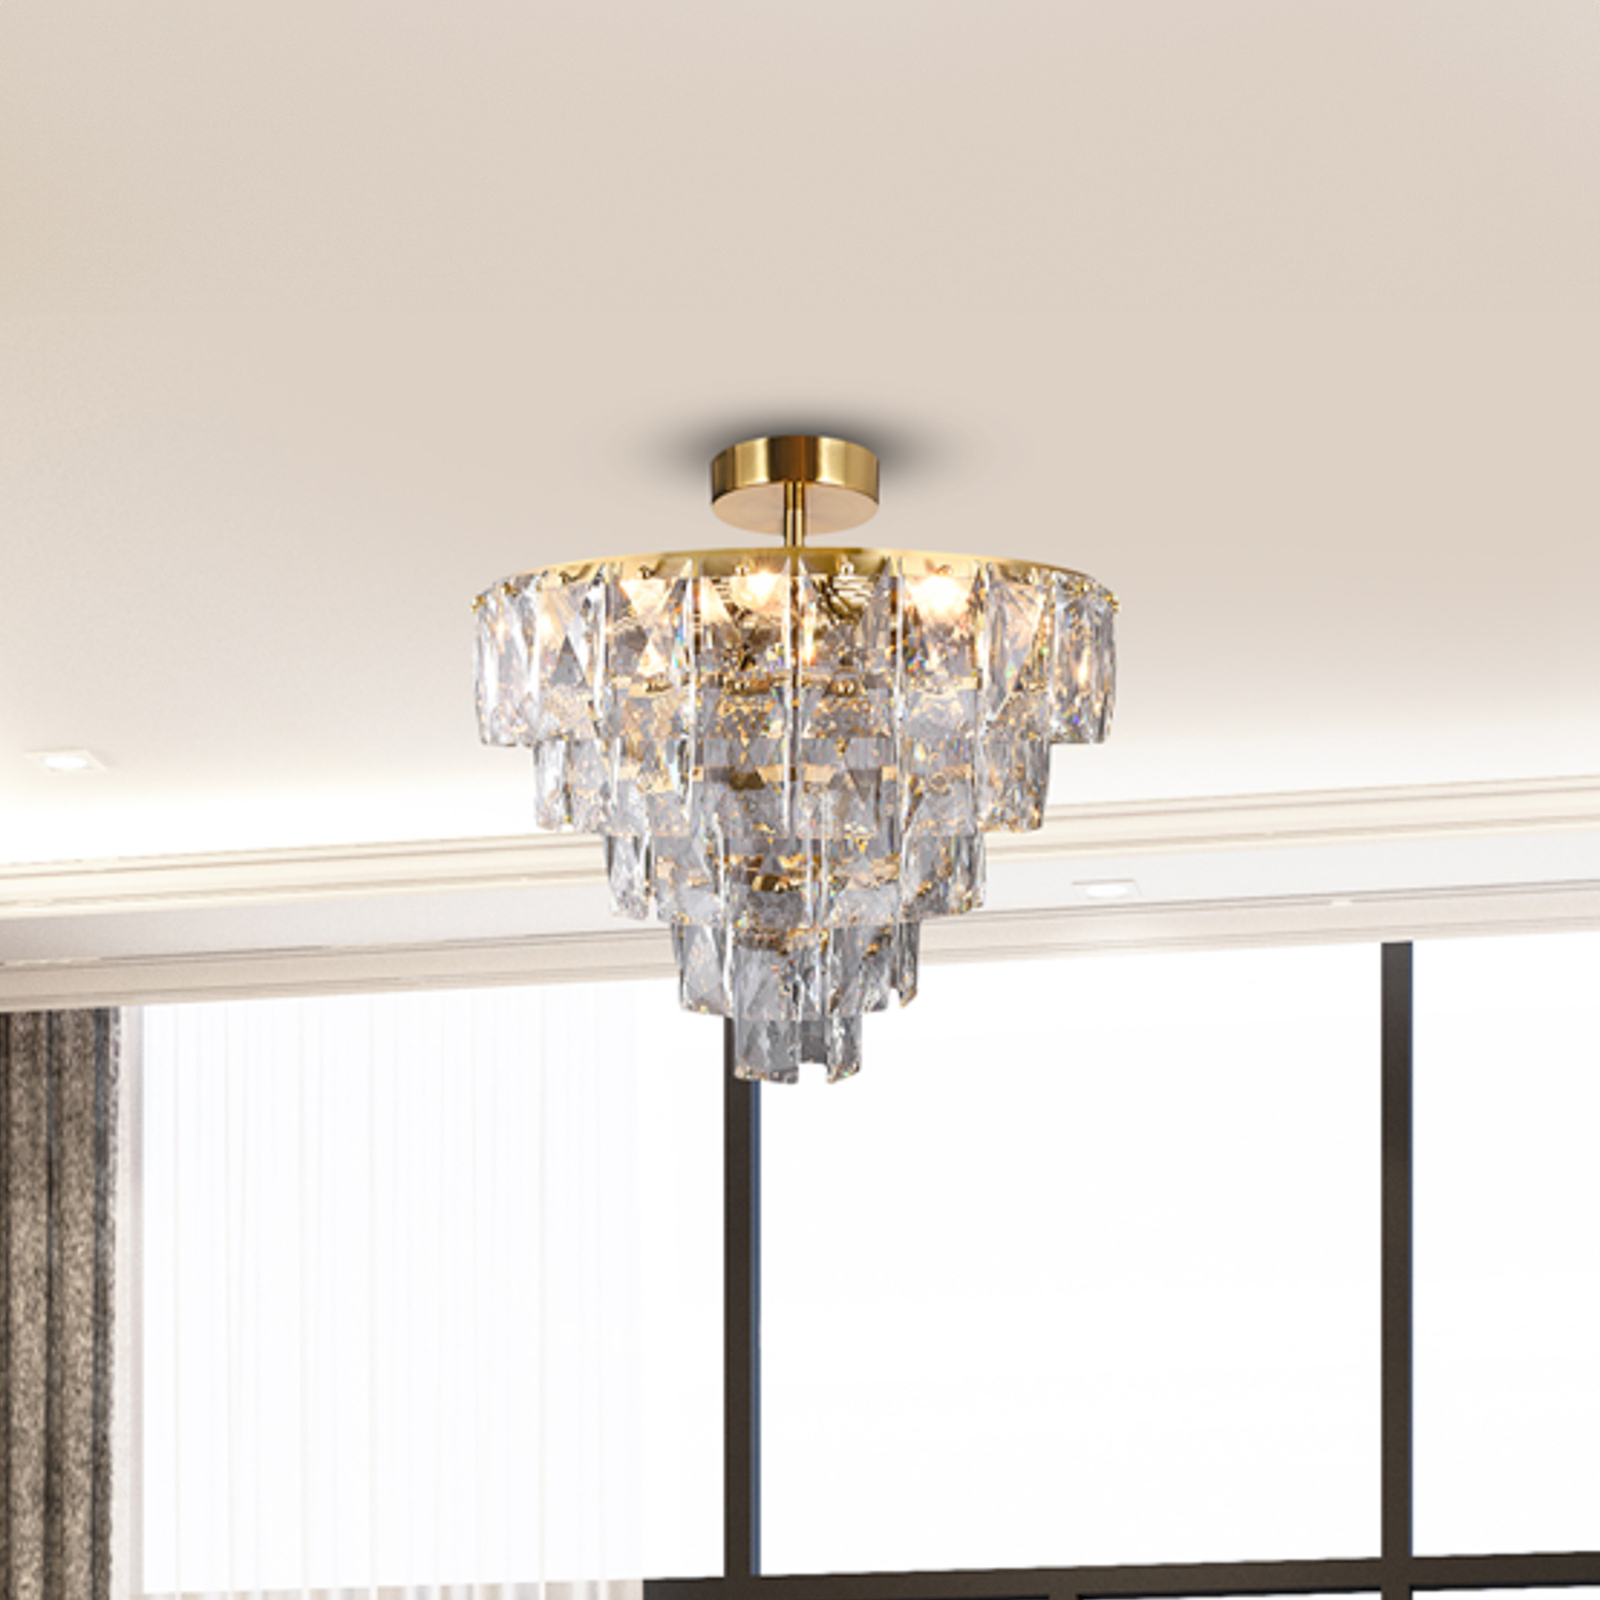 Chelsea metal ceiling lamp gold-coloured glass crystals, Ø 50 cm